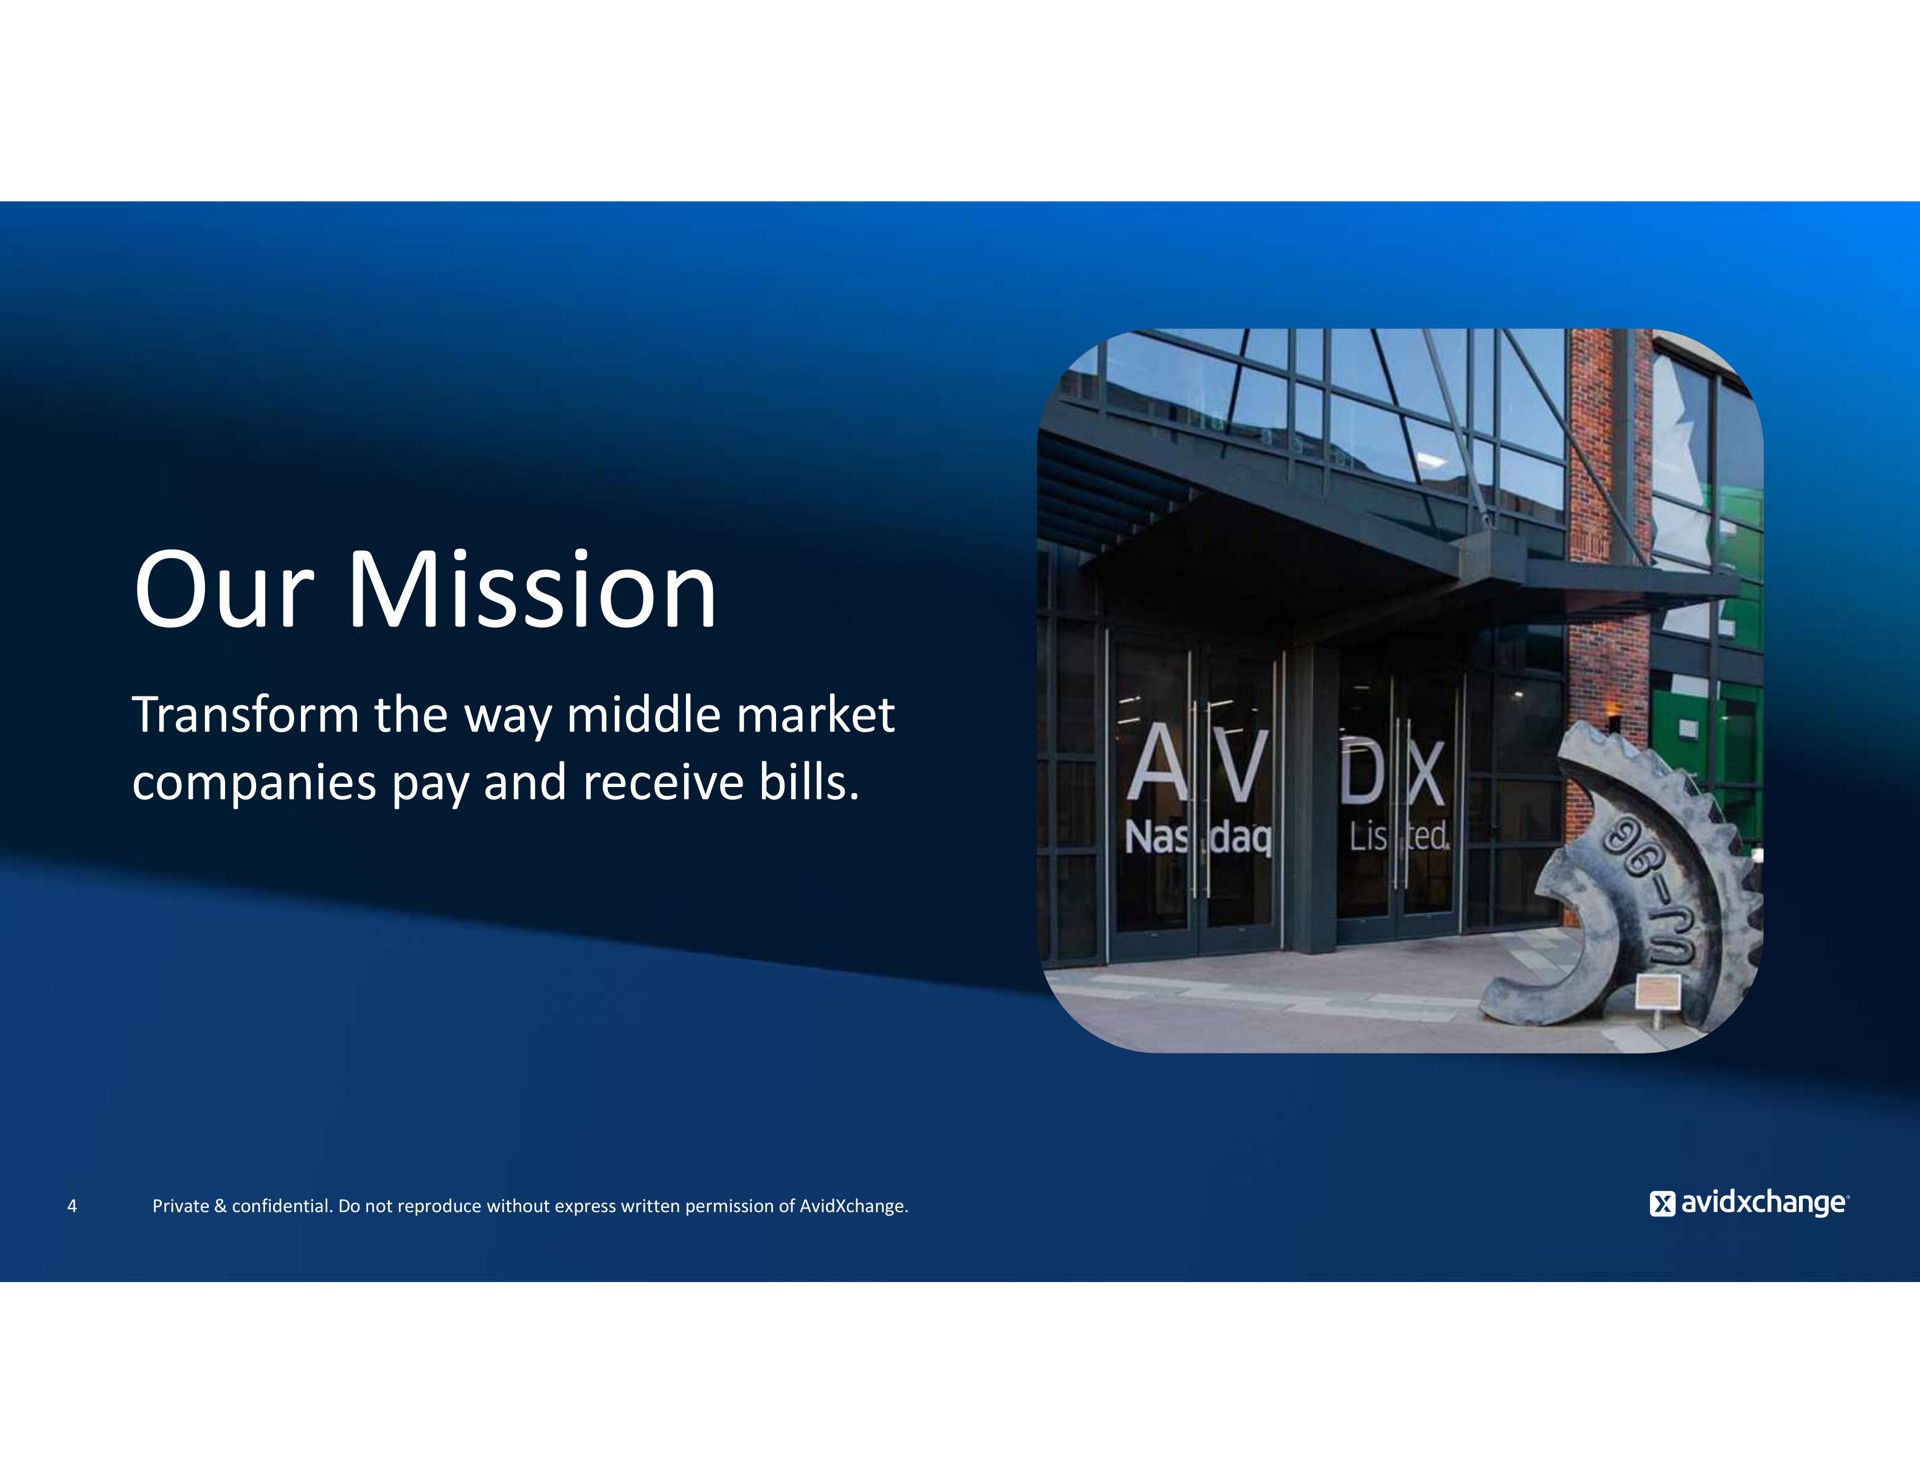 our mission transform the way middle market companies pay and receive bills | AvidXchange